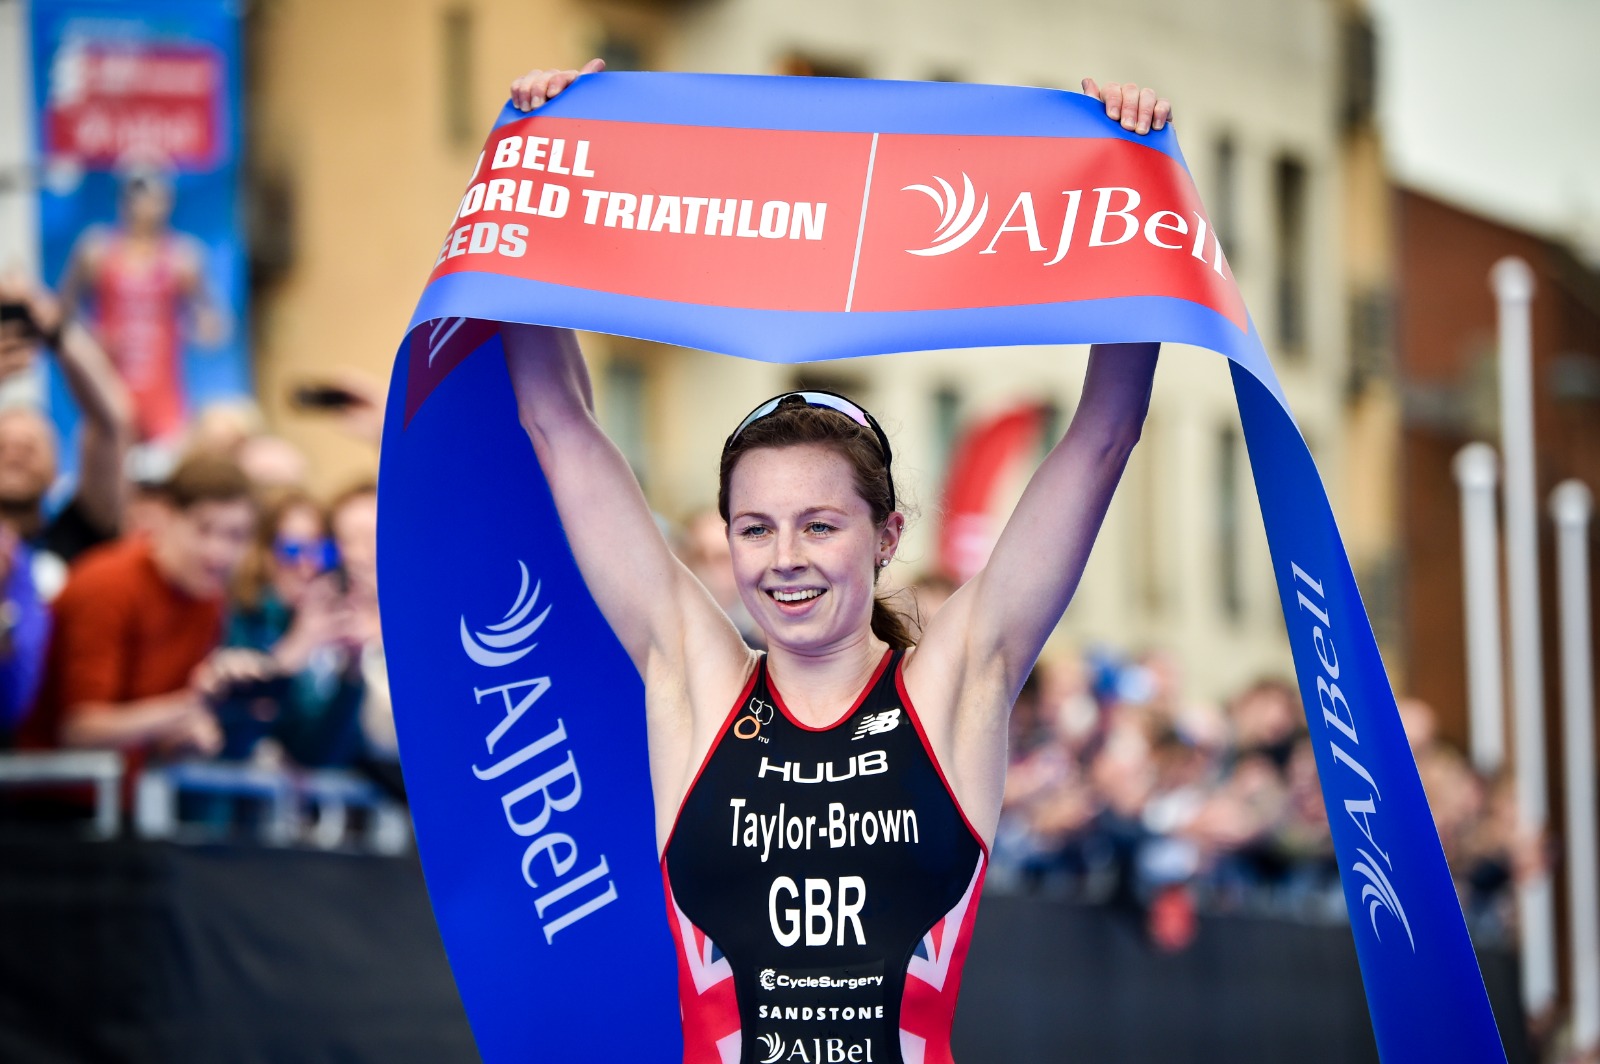 Georgia Taylor Brown shines at WTS Leeds to bring home first World ...